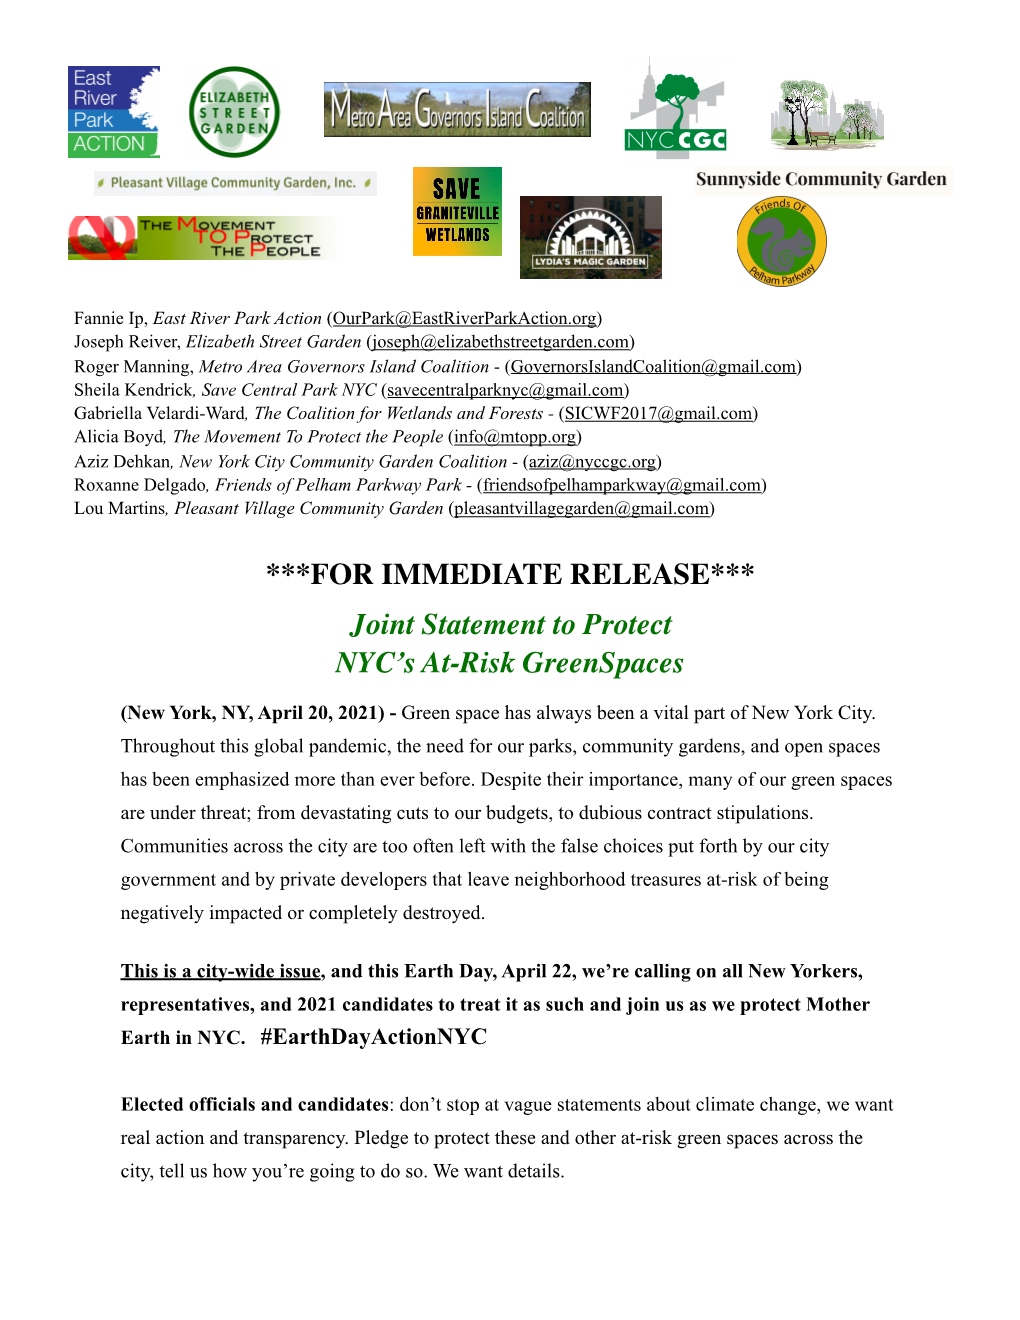 Earth Day 2021 Joint Statement